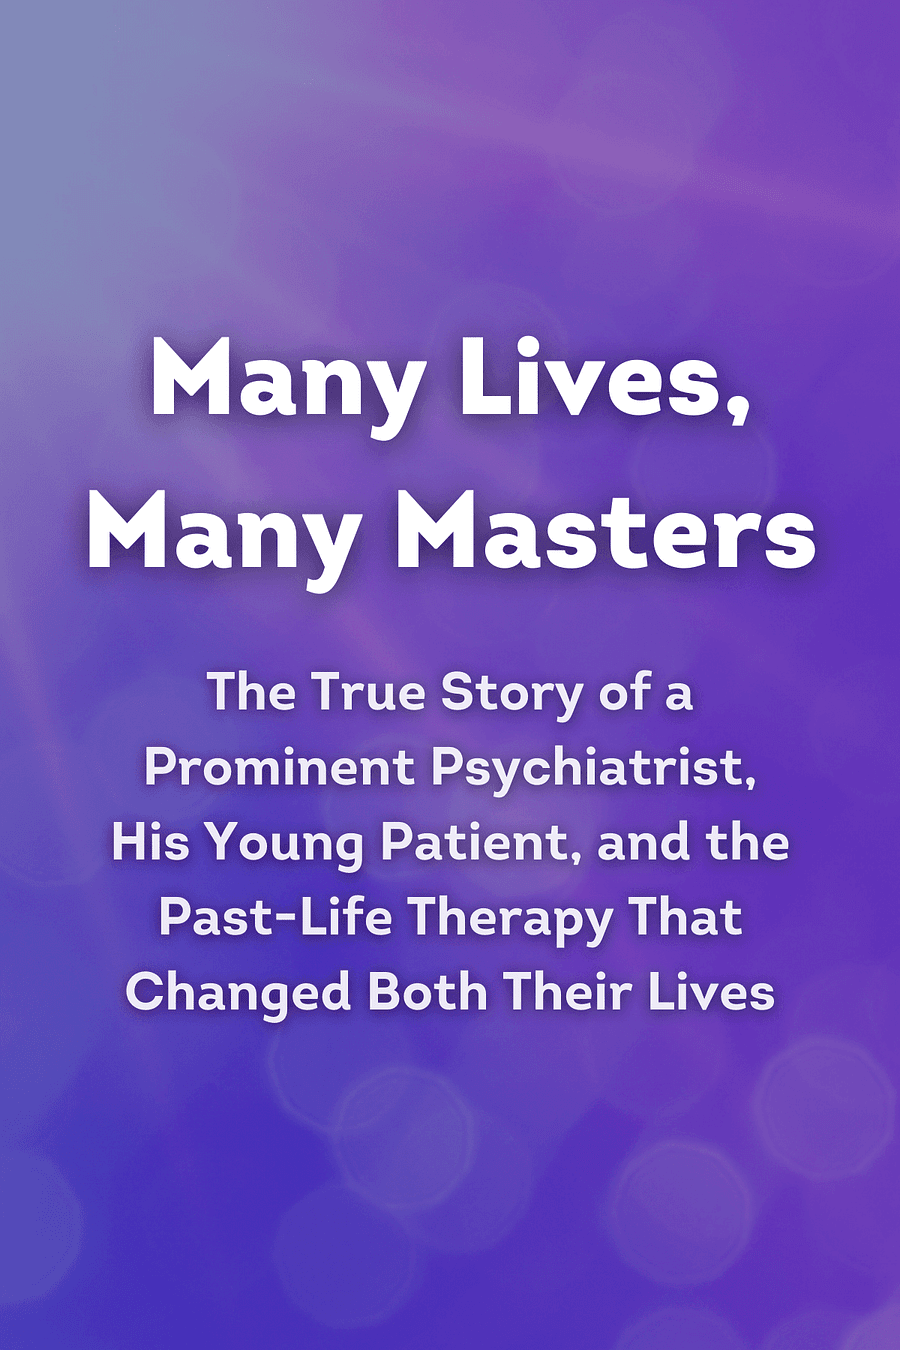 Many Lives, Many Masters by Brian L. Weiss - Book Summary